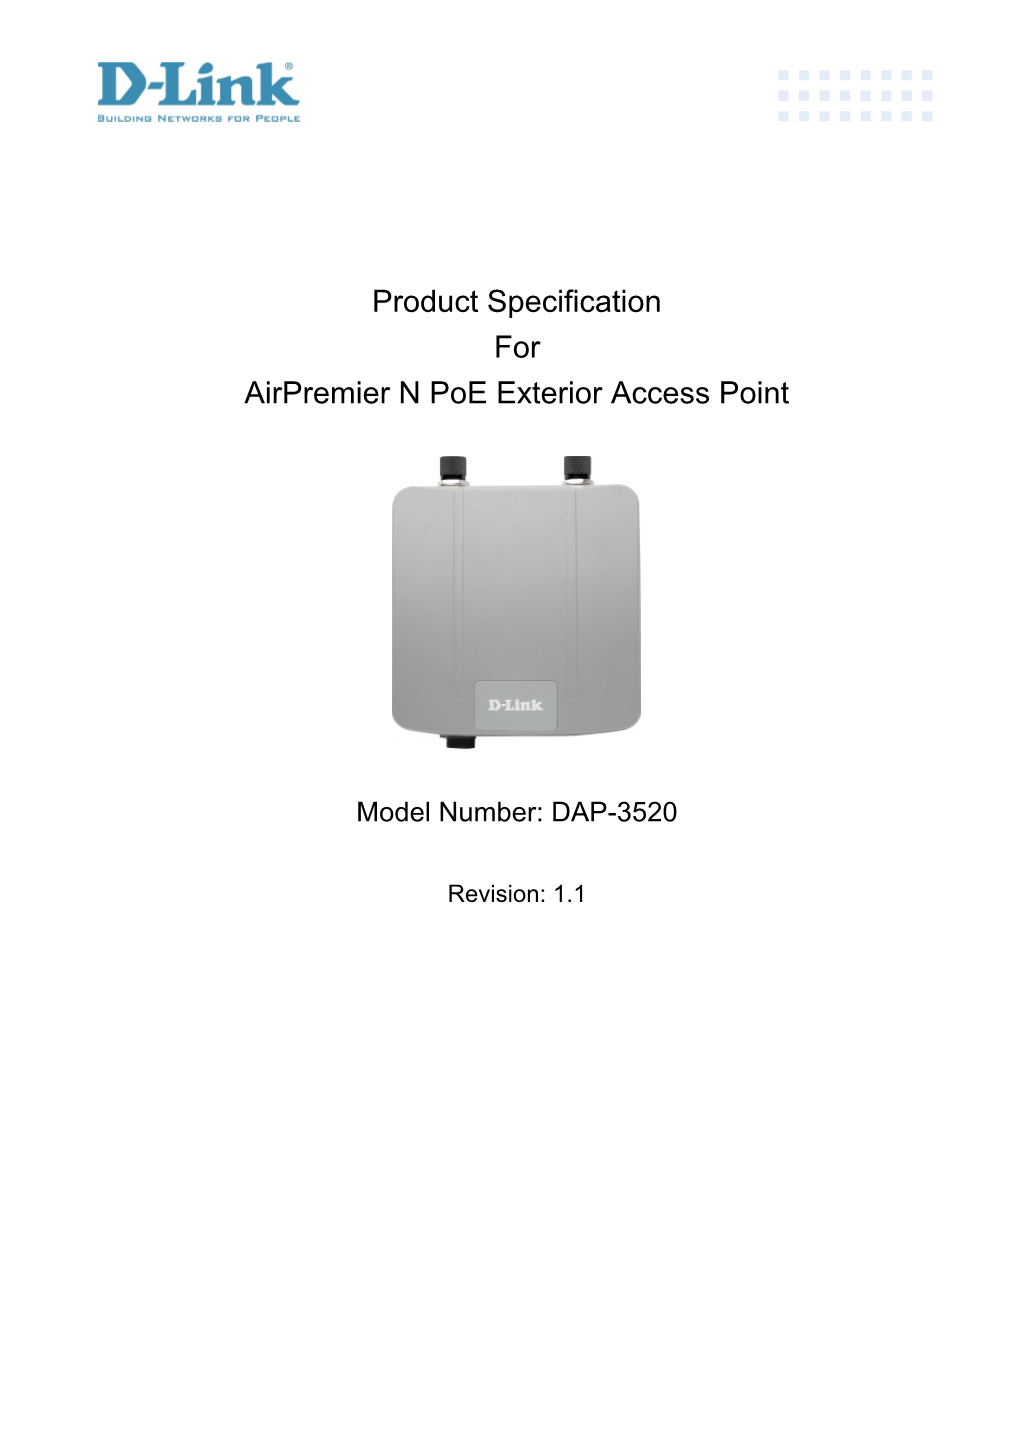 Airpremier N Poe Exterior Access Point